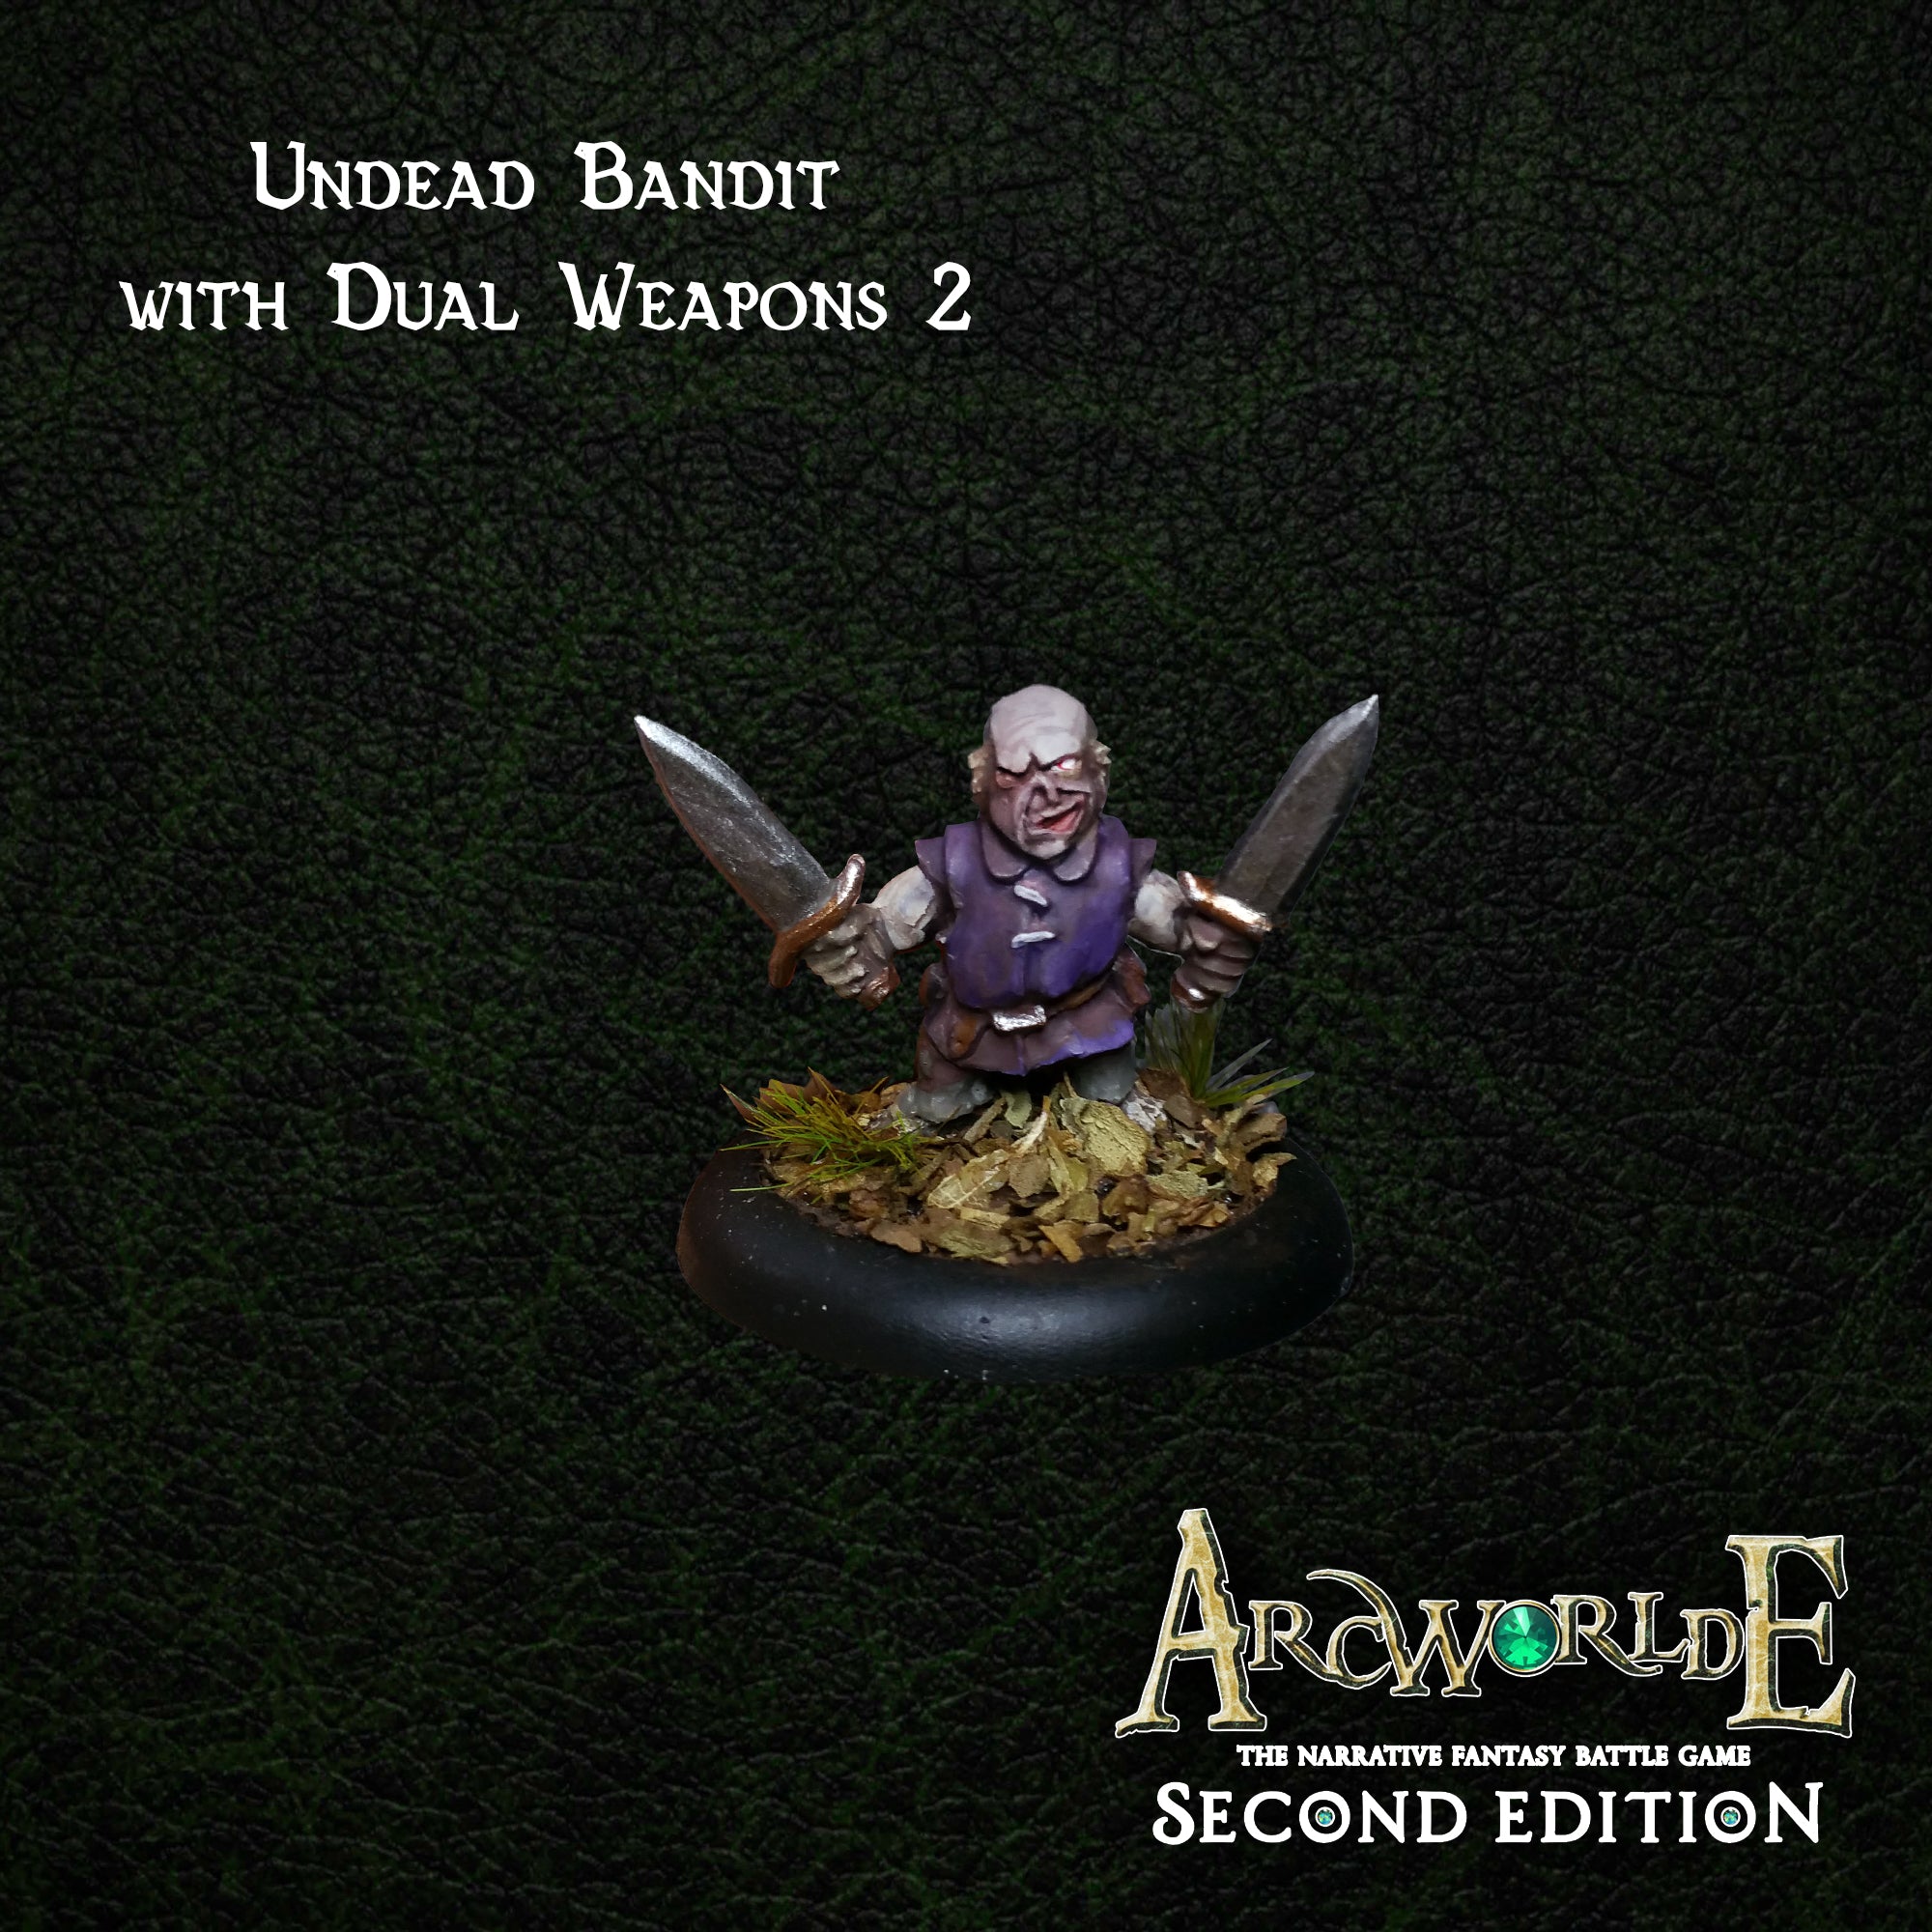 Undead Bandit with Dual Weapons 2